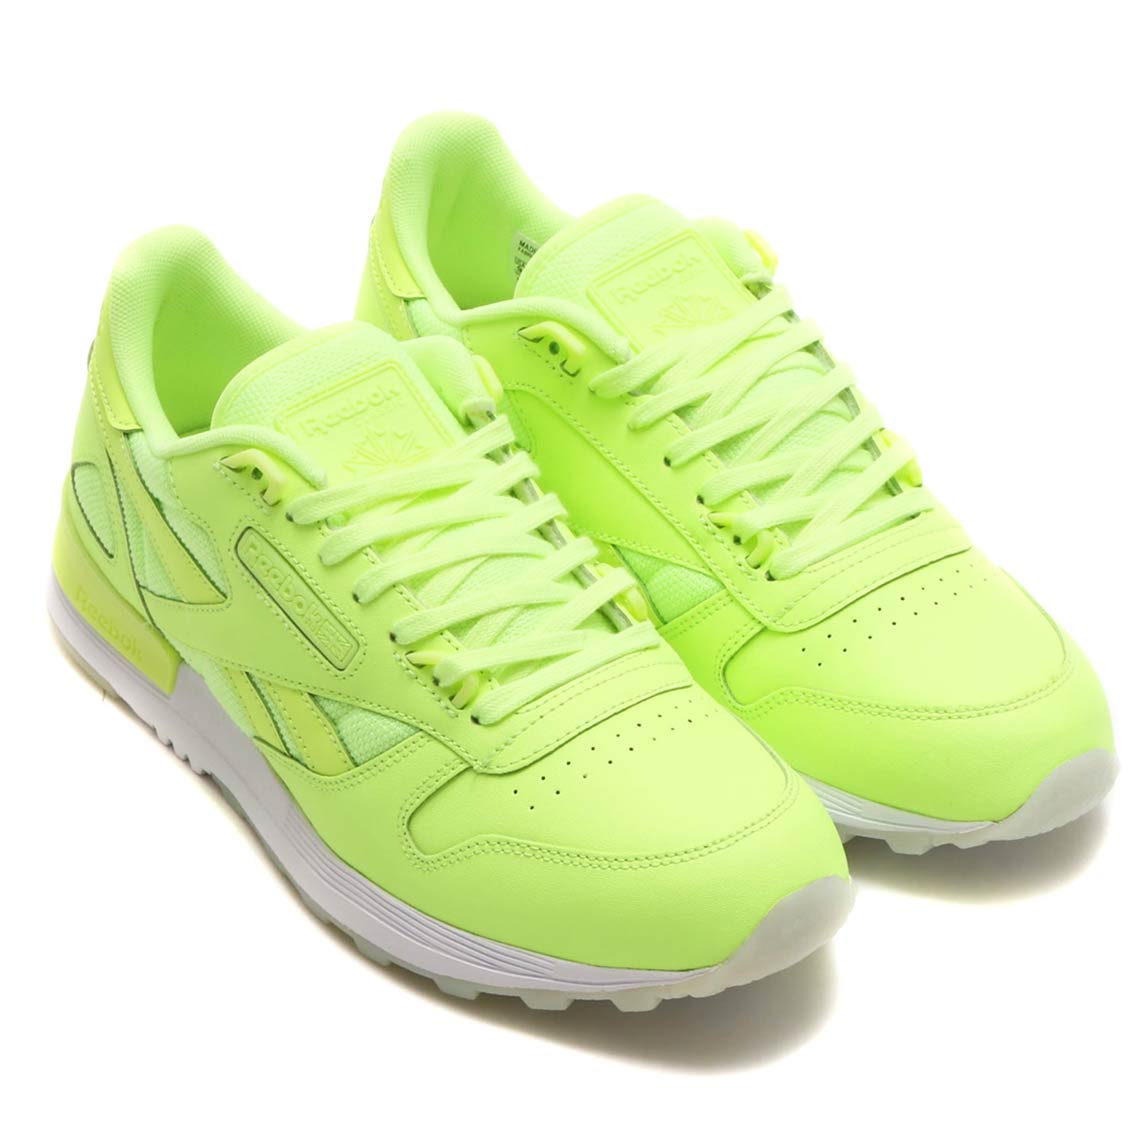 Massakre Refinement barm The Reebok Classic Leather 2.0 Arrives In Three Glow-In-The Dark Colorways  - SneakerNews.com